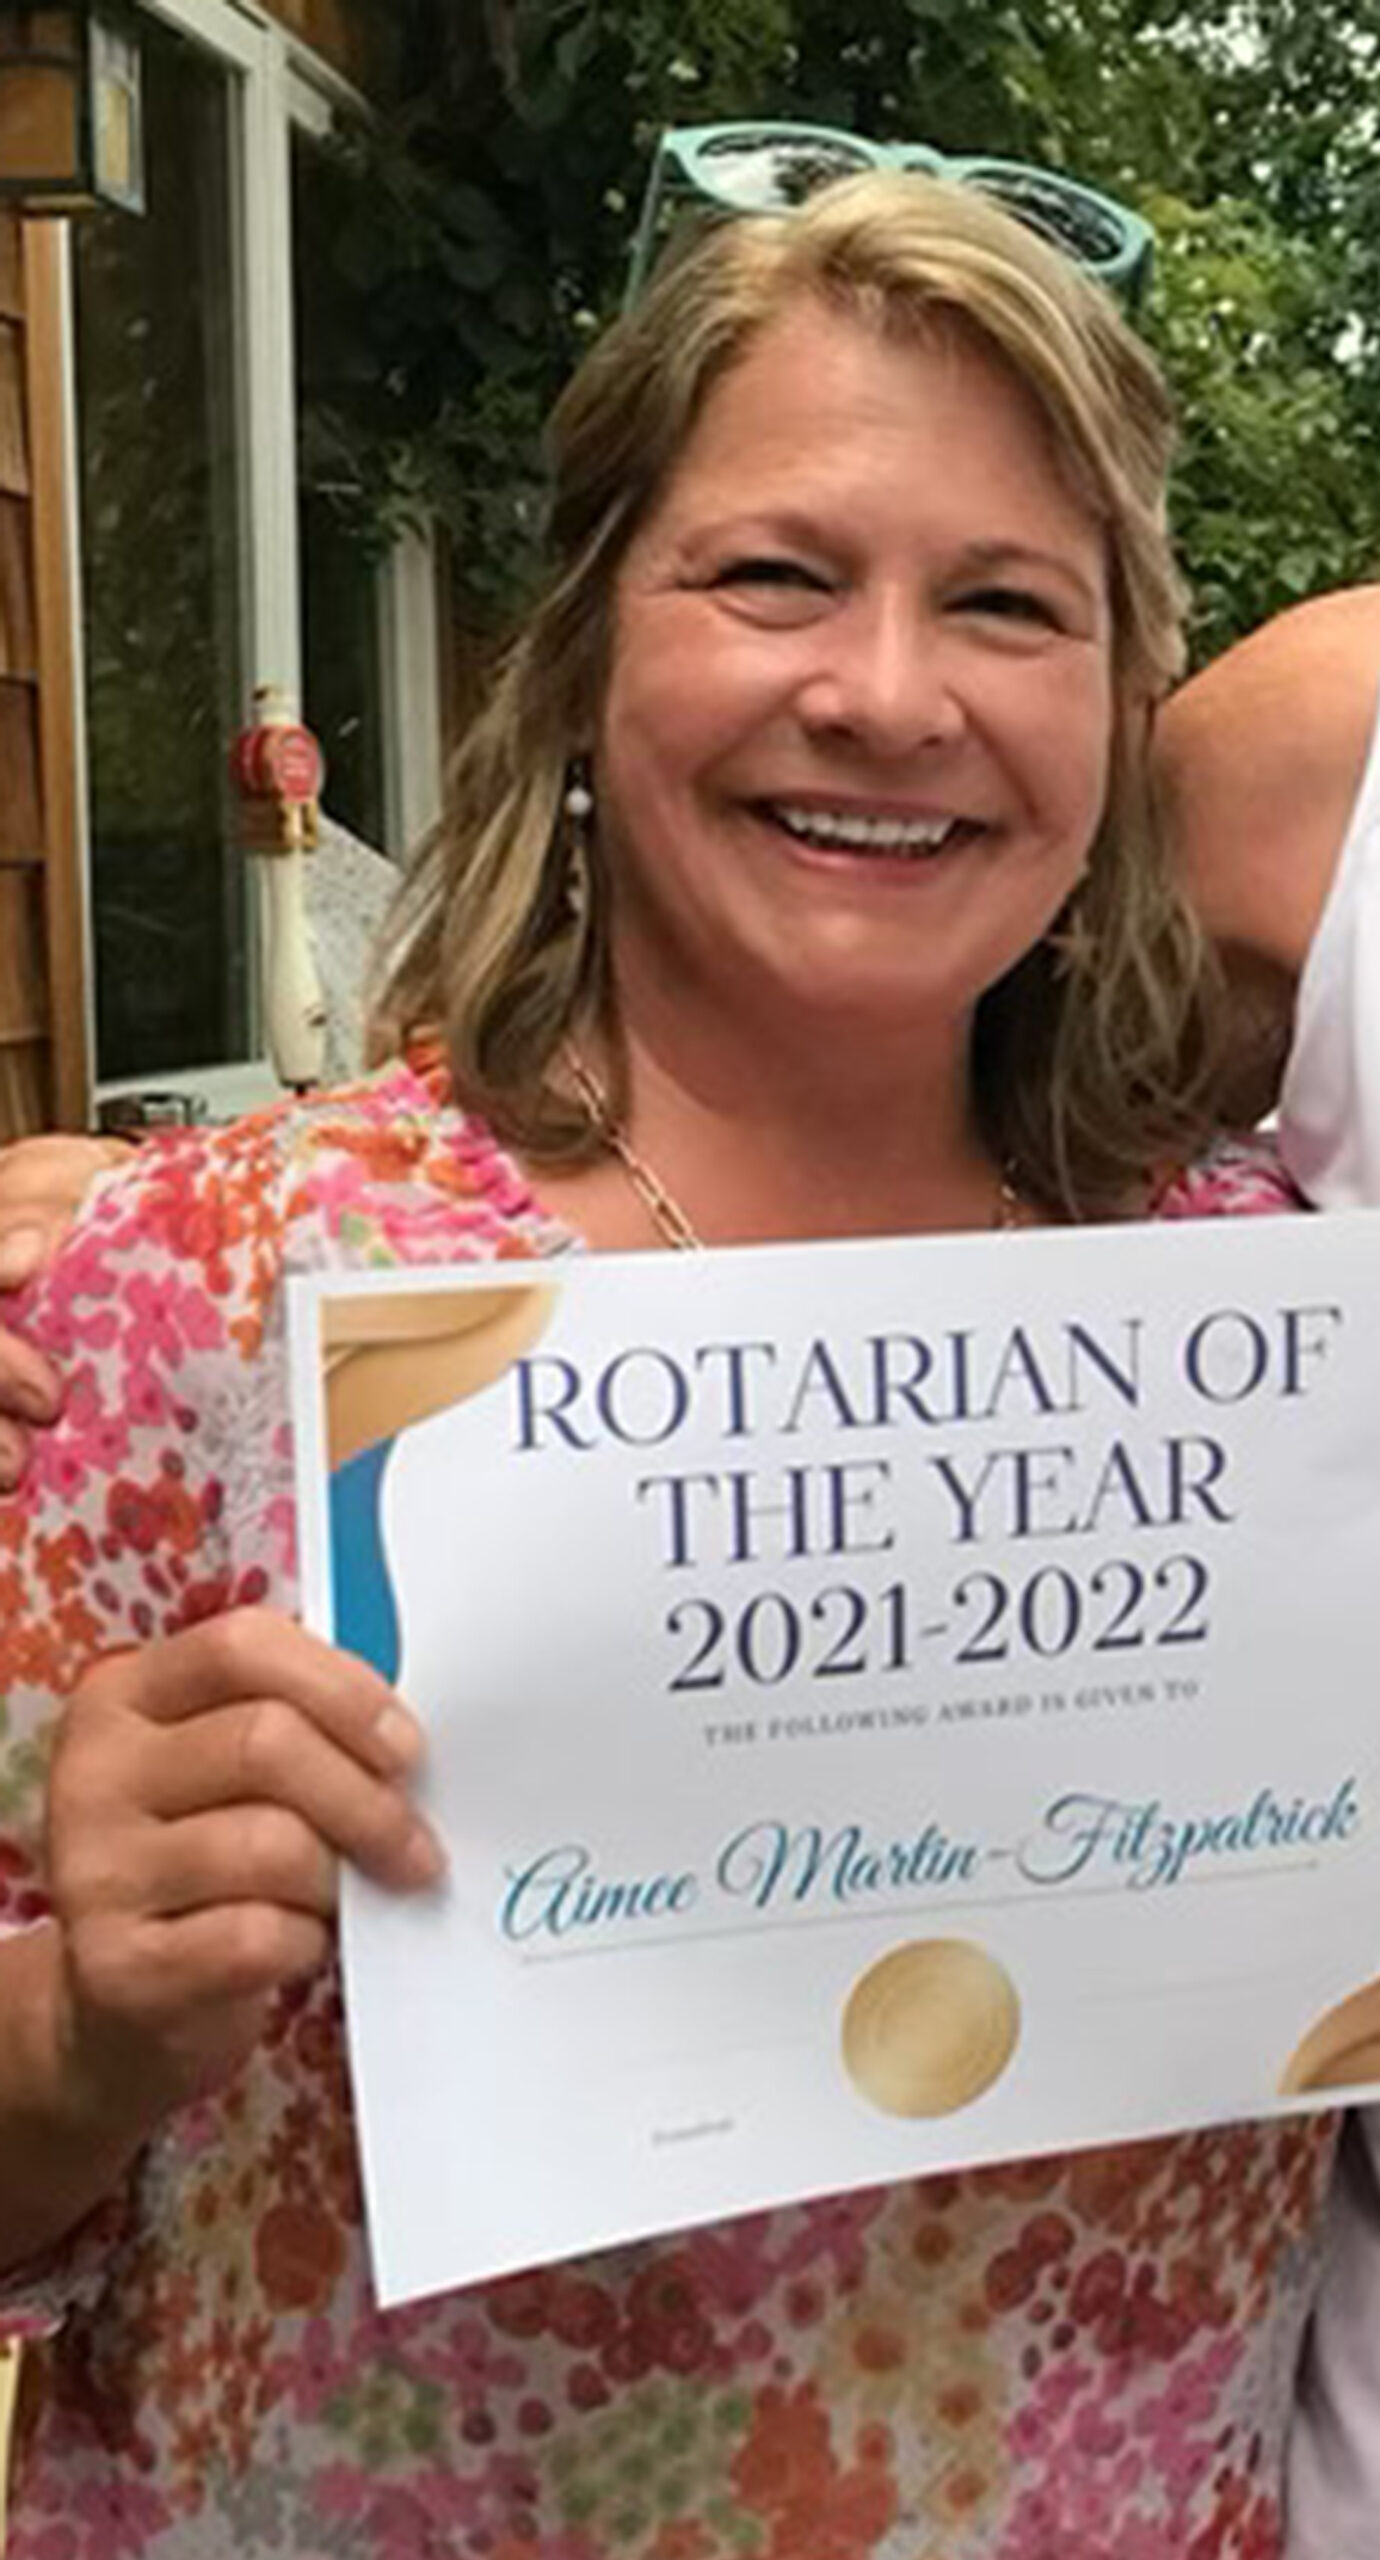 At the annual meeting of the Westhampton Rotary Club last month, Aimee Fitzpatrick Martin and Beth Wiseman were named Rotarians of the Year and presented with certificates by Peggy Jayne, president of Westhampton Beach Rotary.  COURTESY BETH FLANAGAN